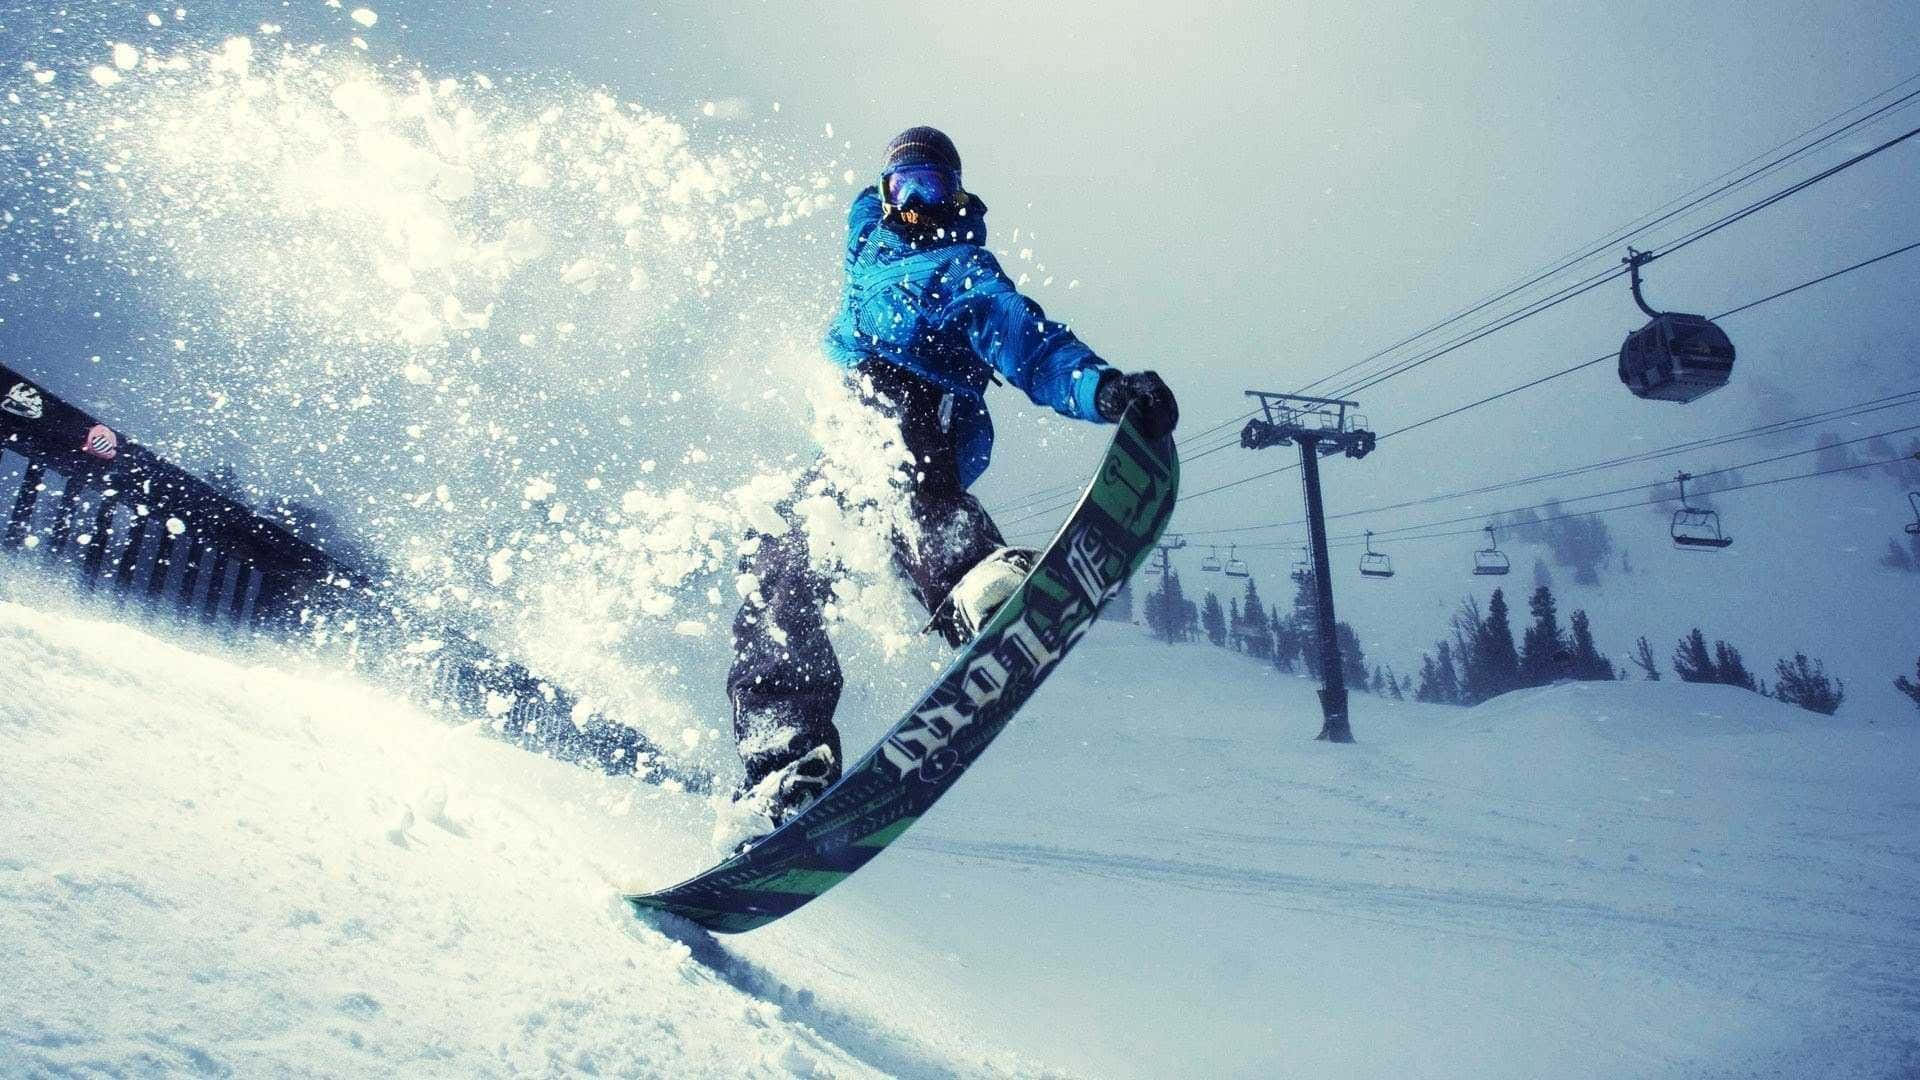 Captivating Winter Wonderland With Snowboarder In Motion Wallpaper